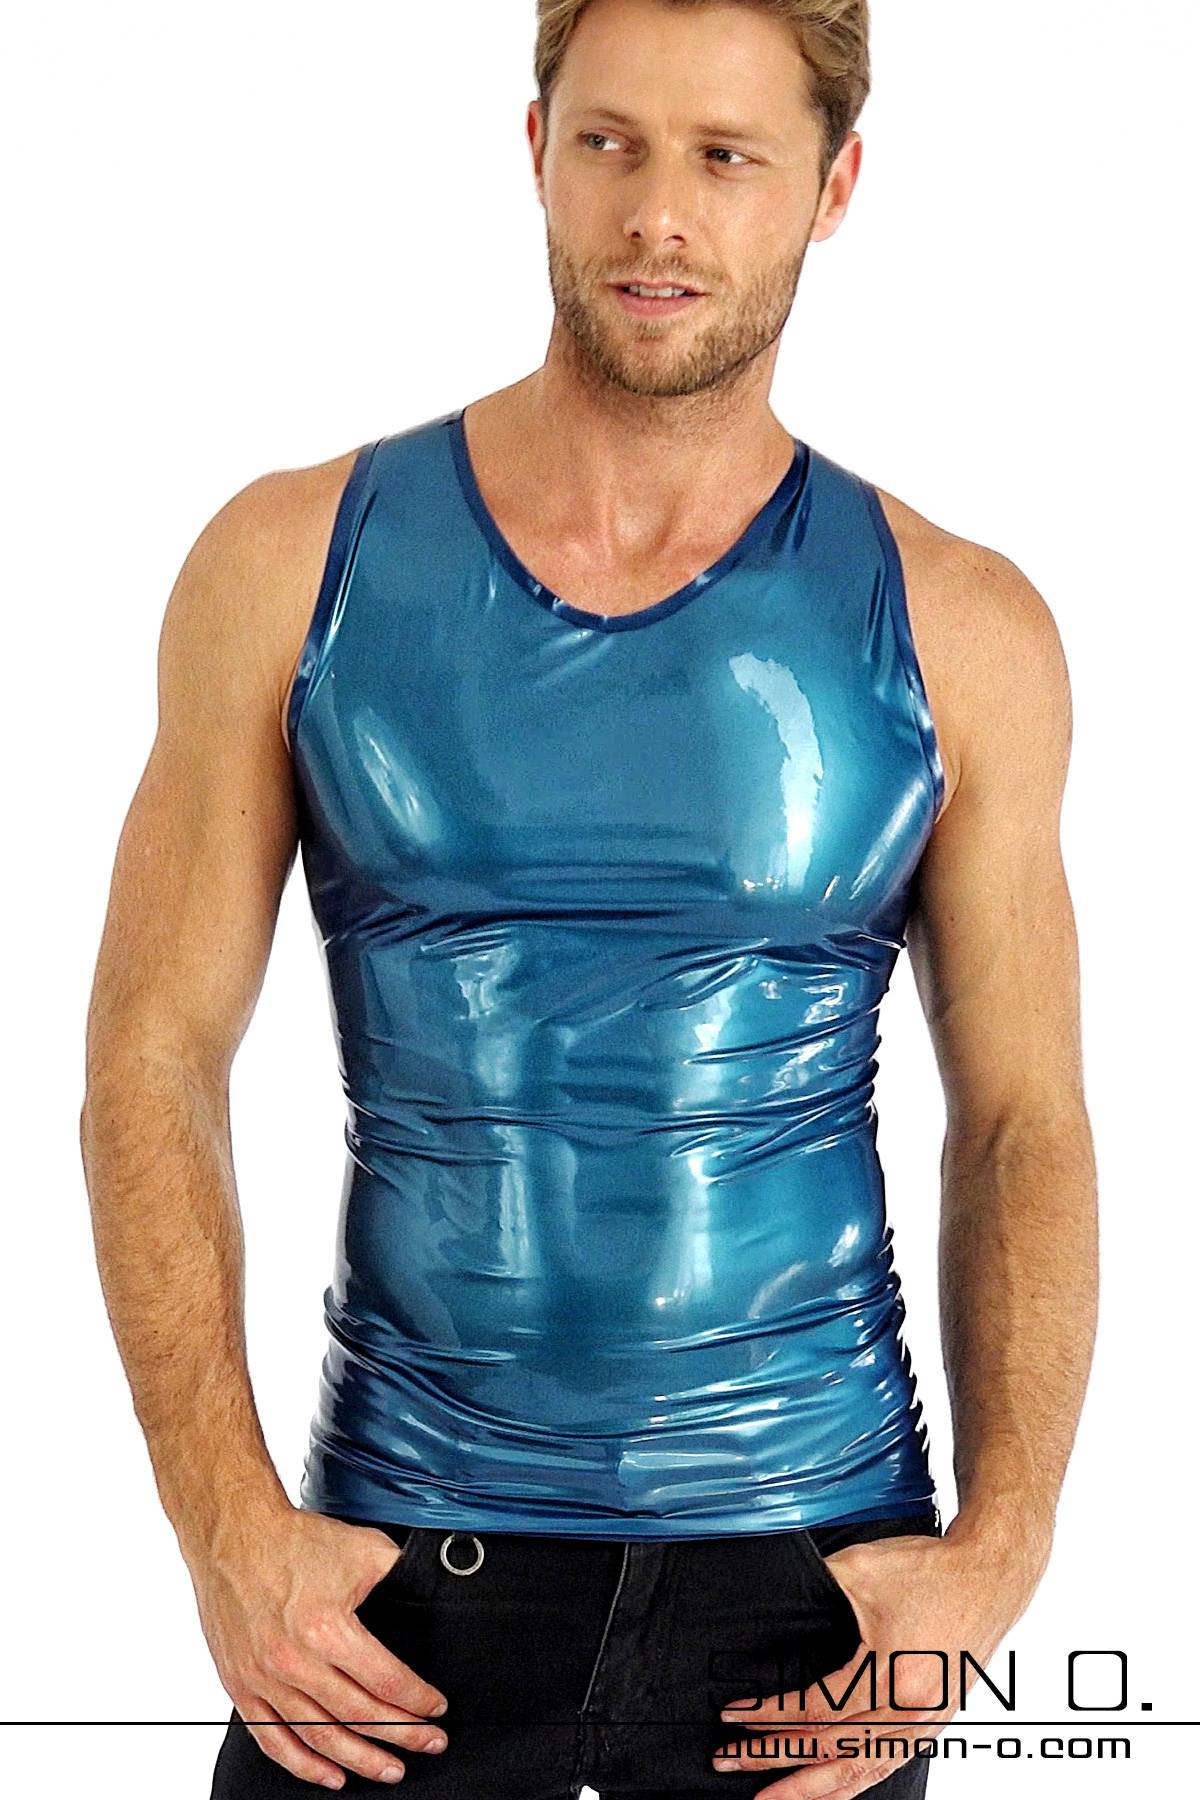 Sleeveless latex shirt in blue with round neckline seen from behind